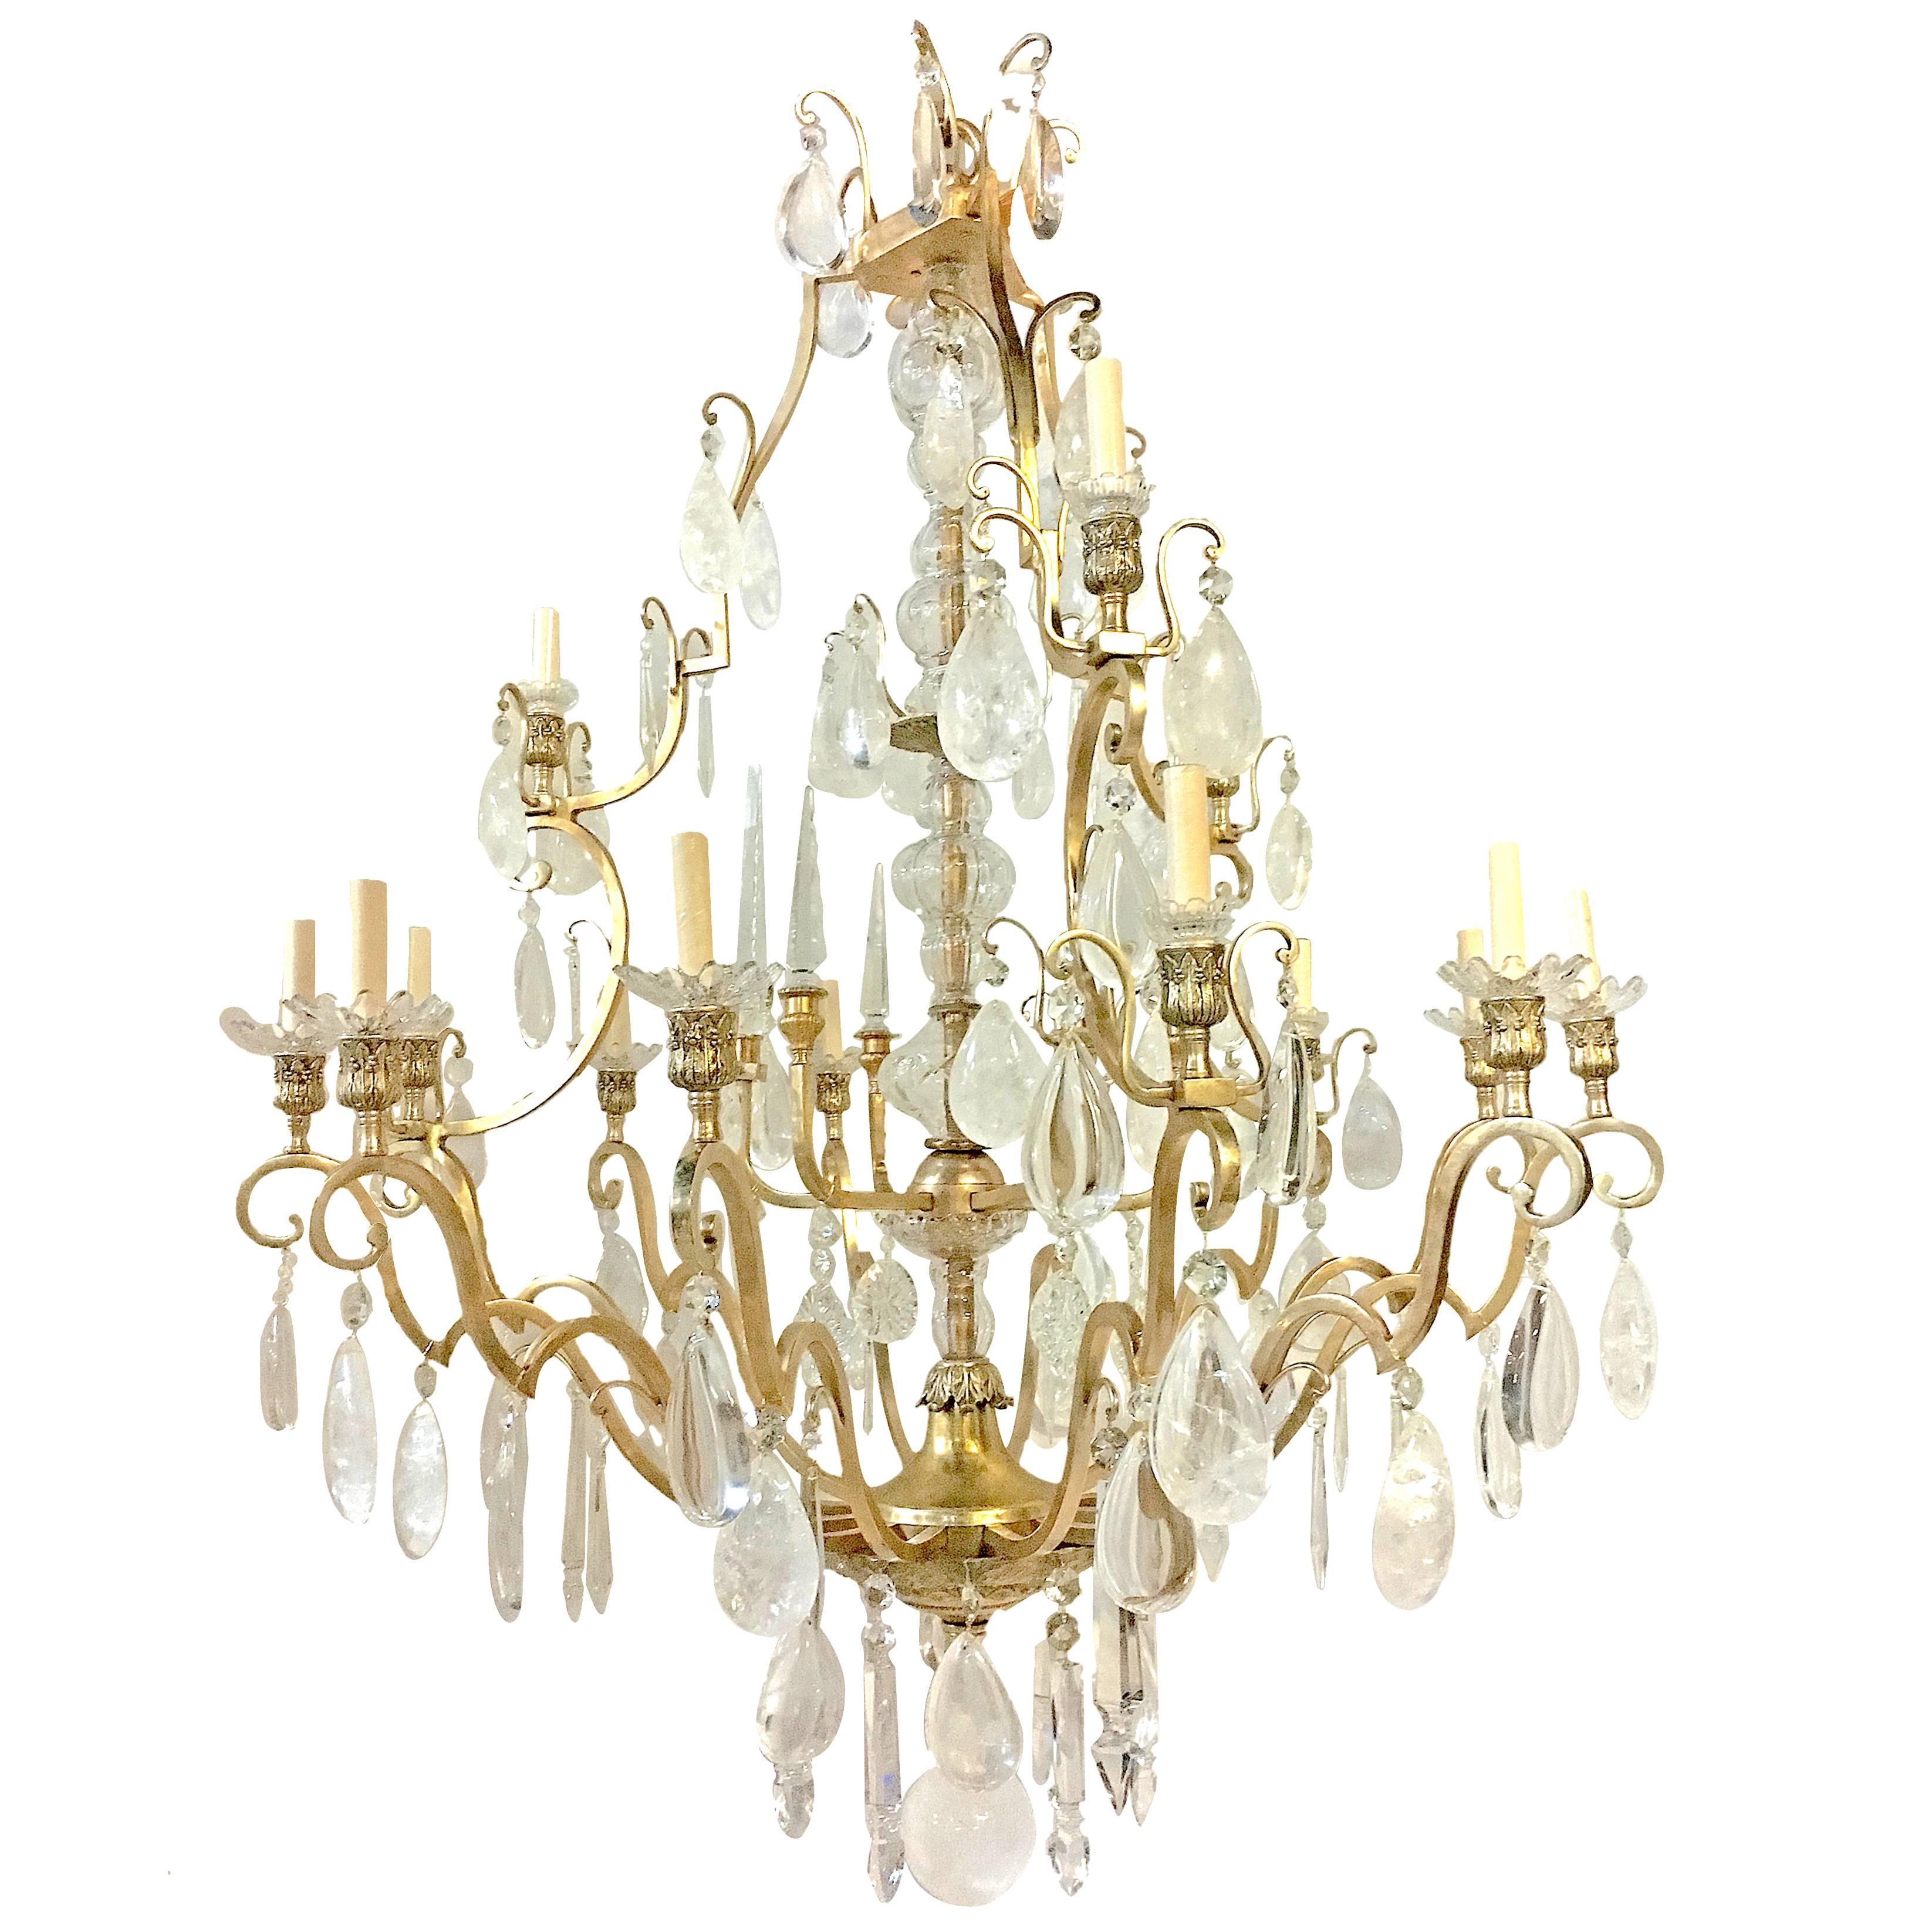 A large 1920s neoclassic style rock crystal chandeliers with 18 lights each. The body made of patinated bronze and with rock crystal and crystal pendants. Garnished with crystal spears.

Measurements:
Height: 58